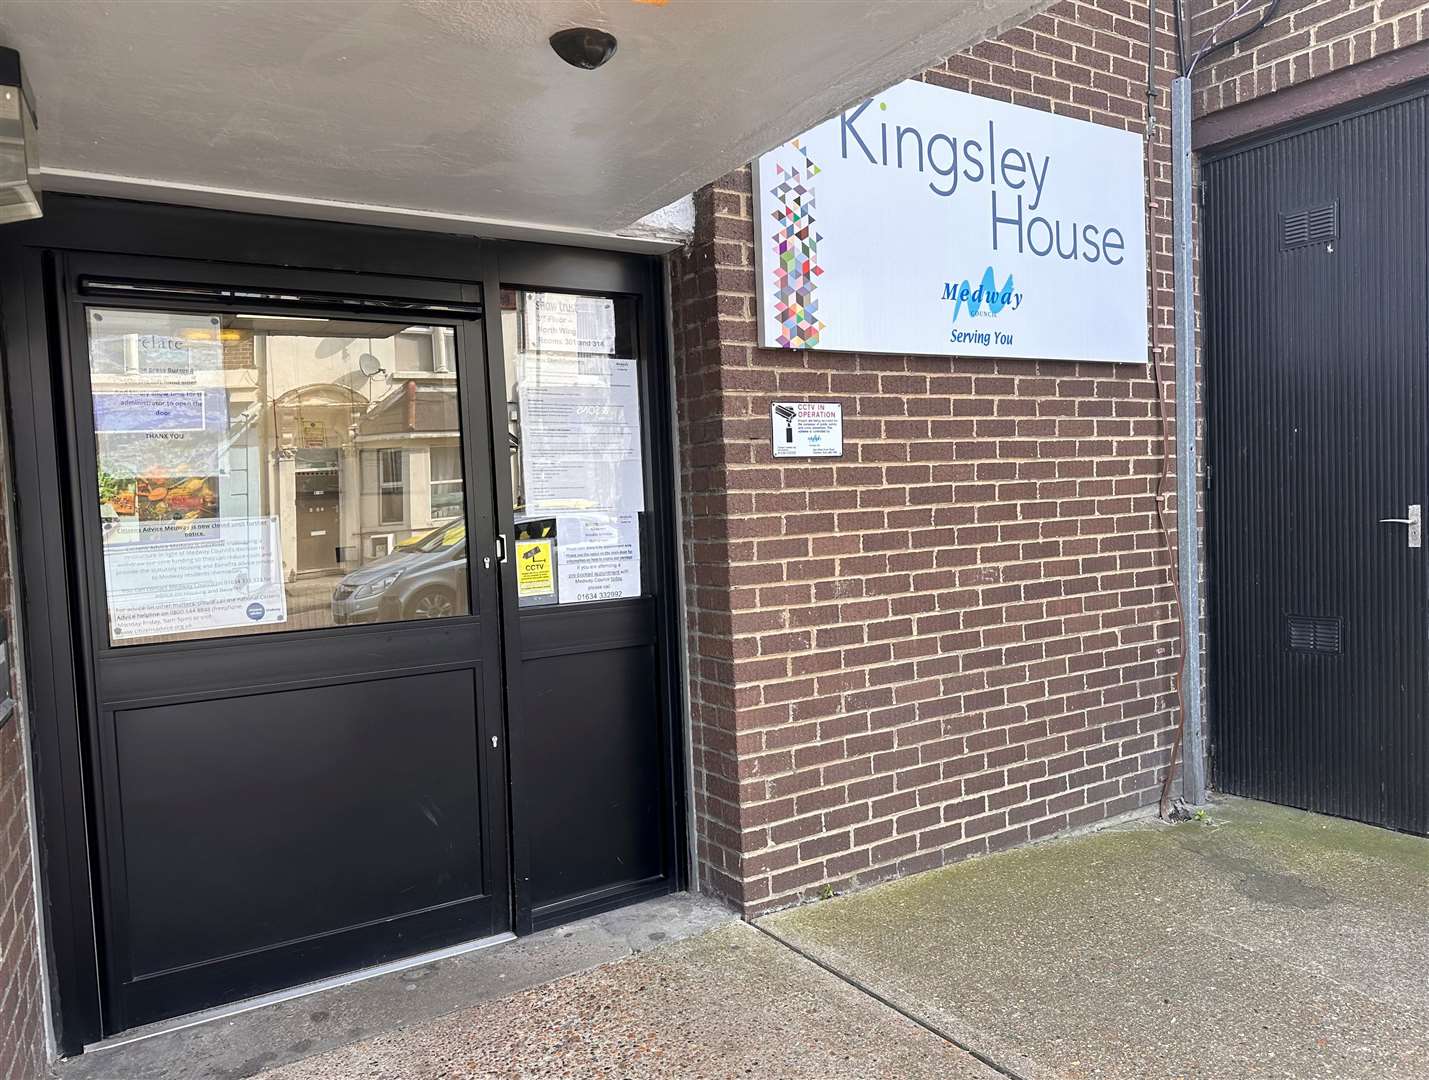 Citizens Advice Medway is based at Kingsley House, Balmoral Road, Gillingham